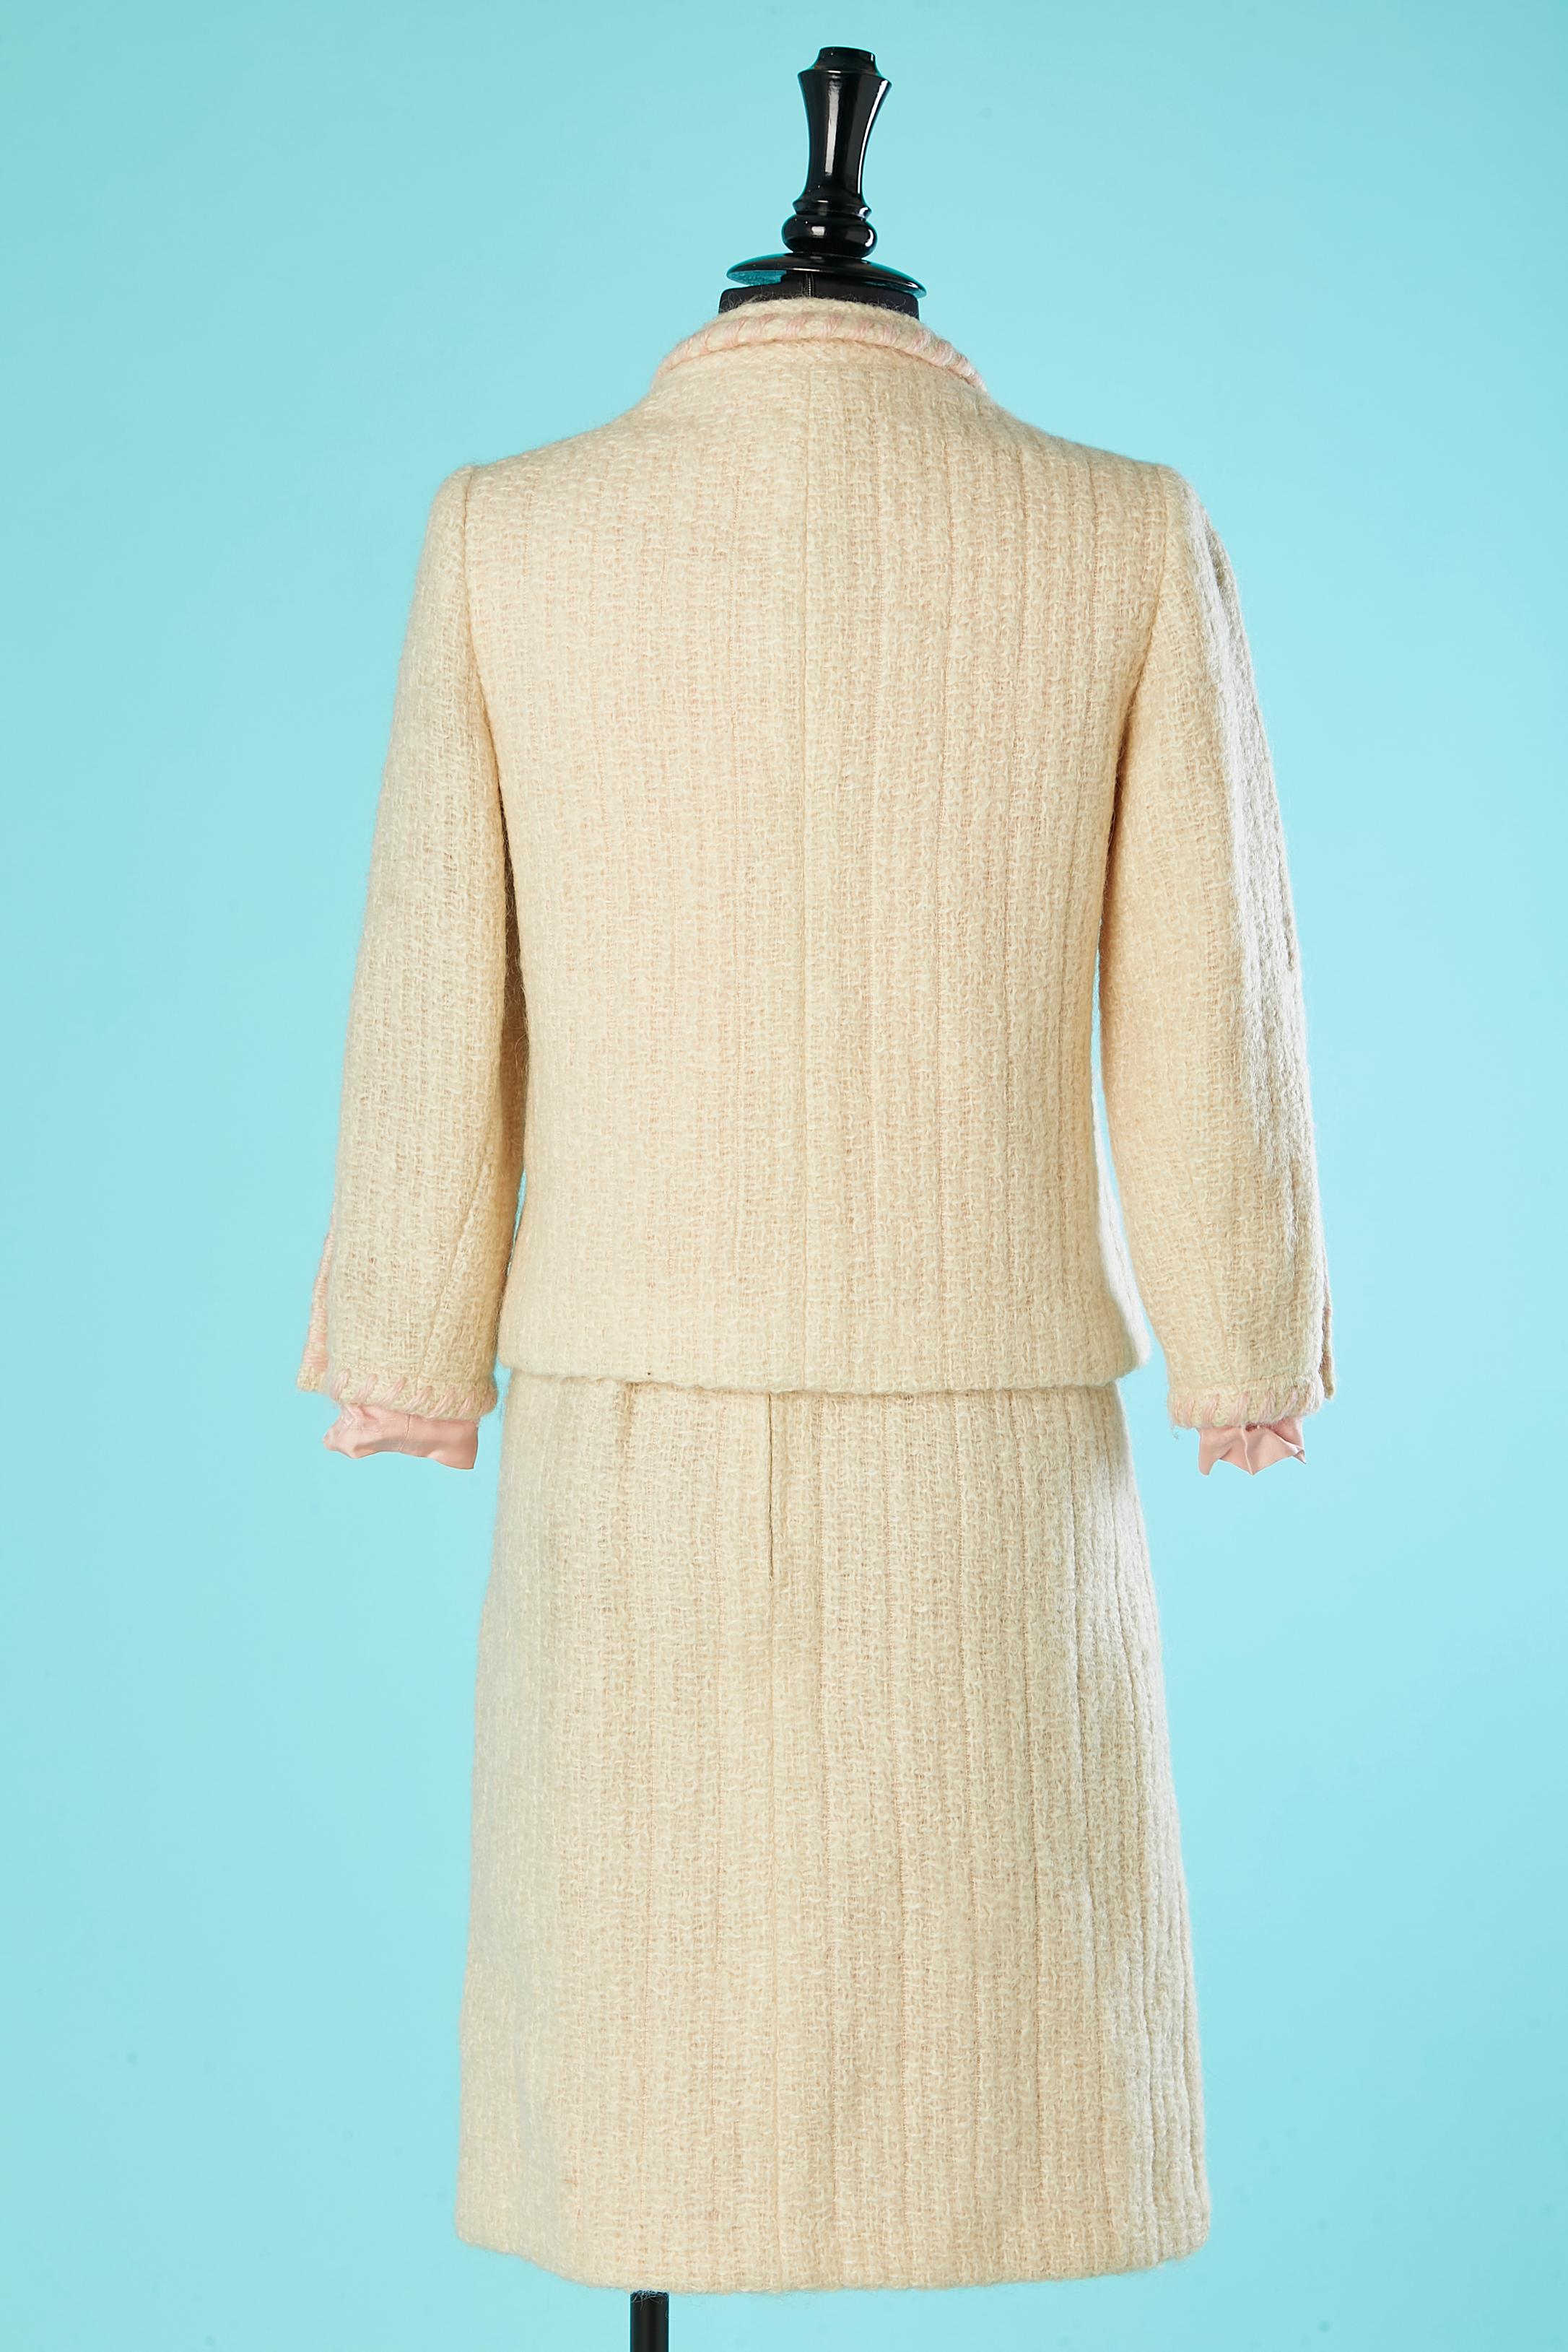 Off-white tweed and pale silk jacket and dress ensemble Chanel 1964  3